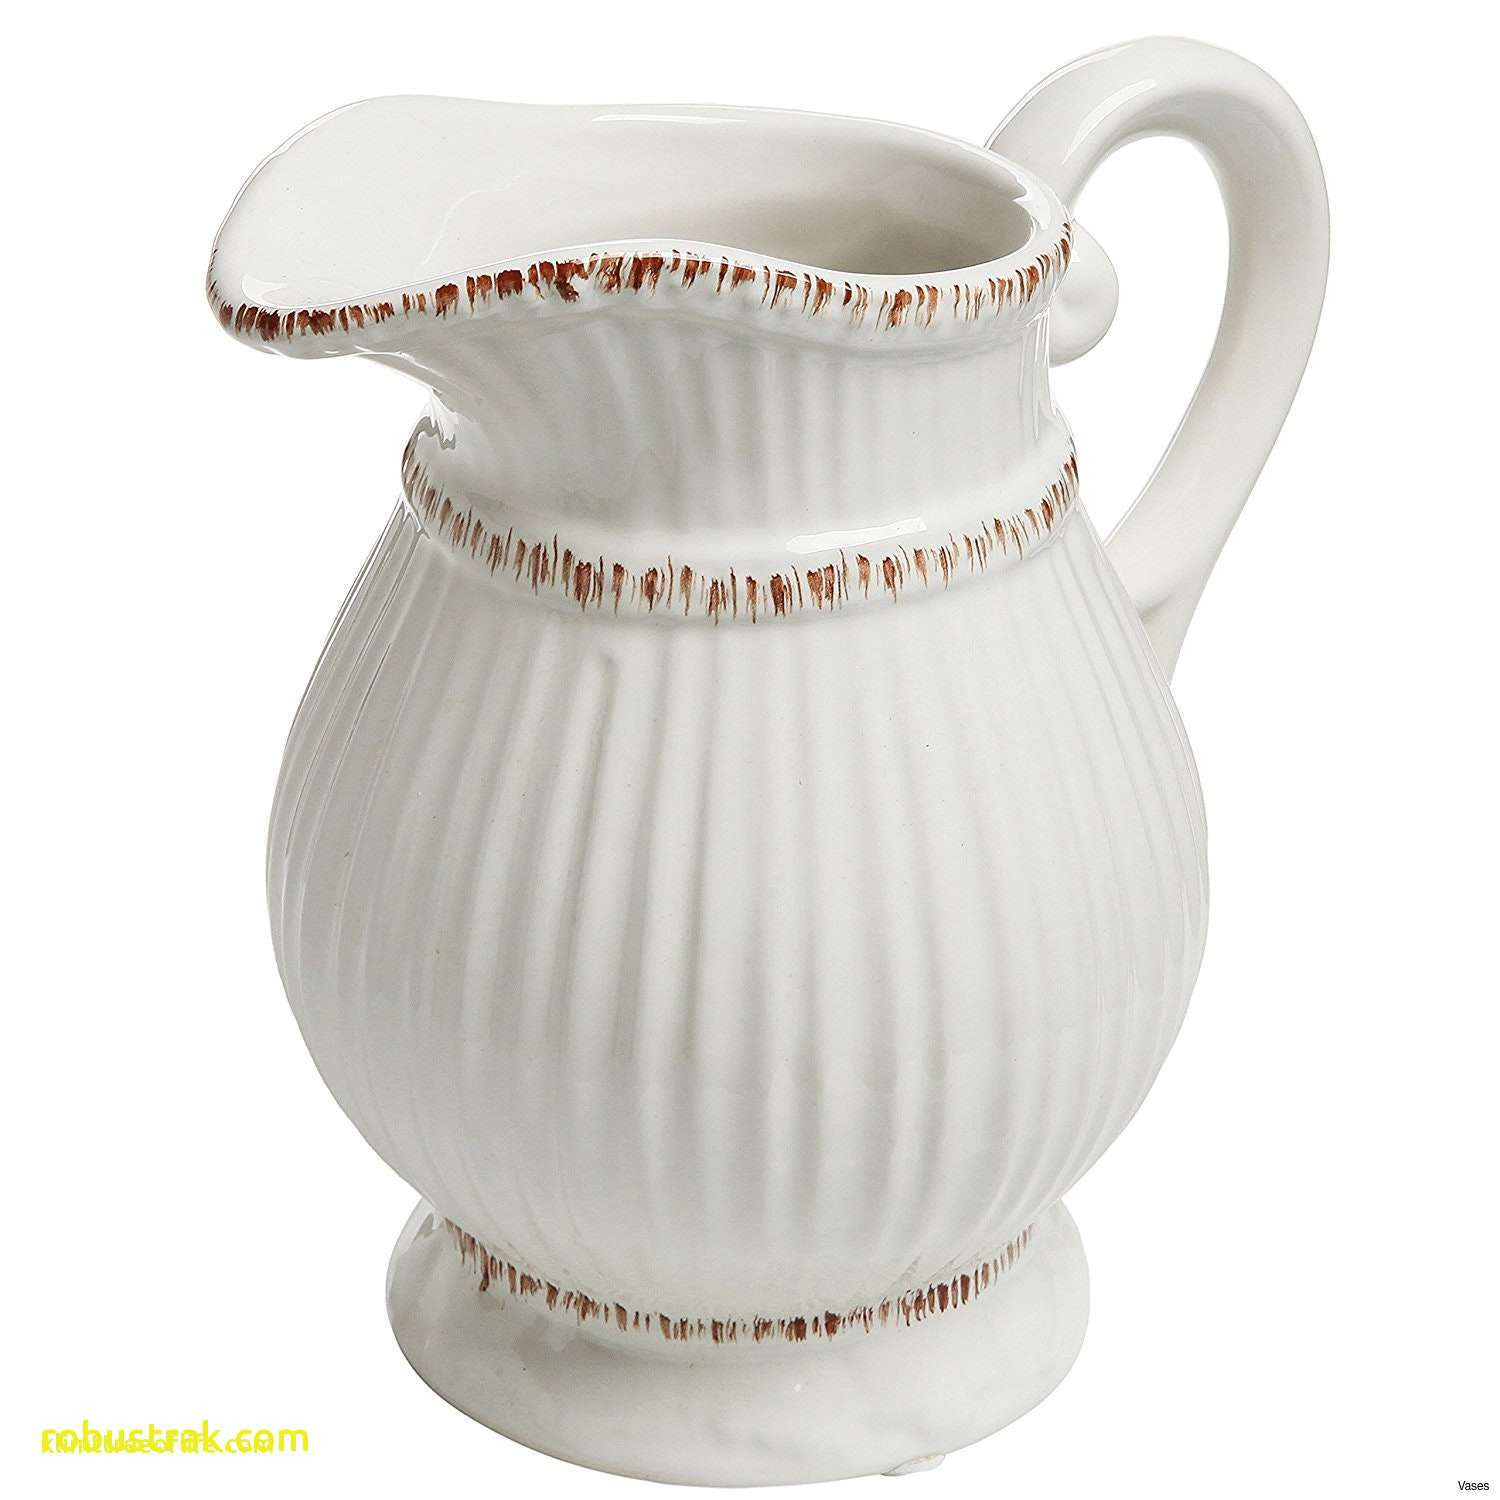 26 Recommended Modern Ceramic Vase 2022 free download modern ceramic vase of lovely french country ceramics home design ideas inside 817qztdtqal sl1500 h vases white ceramic pitcher vase amazon vintage style french country water flower decorati